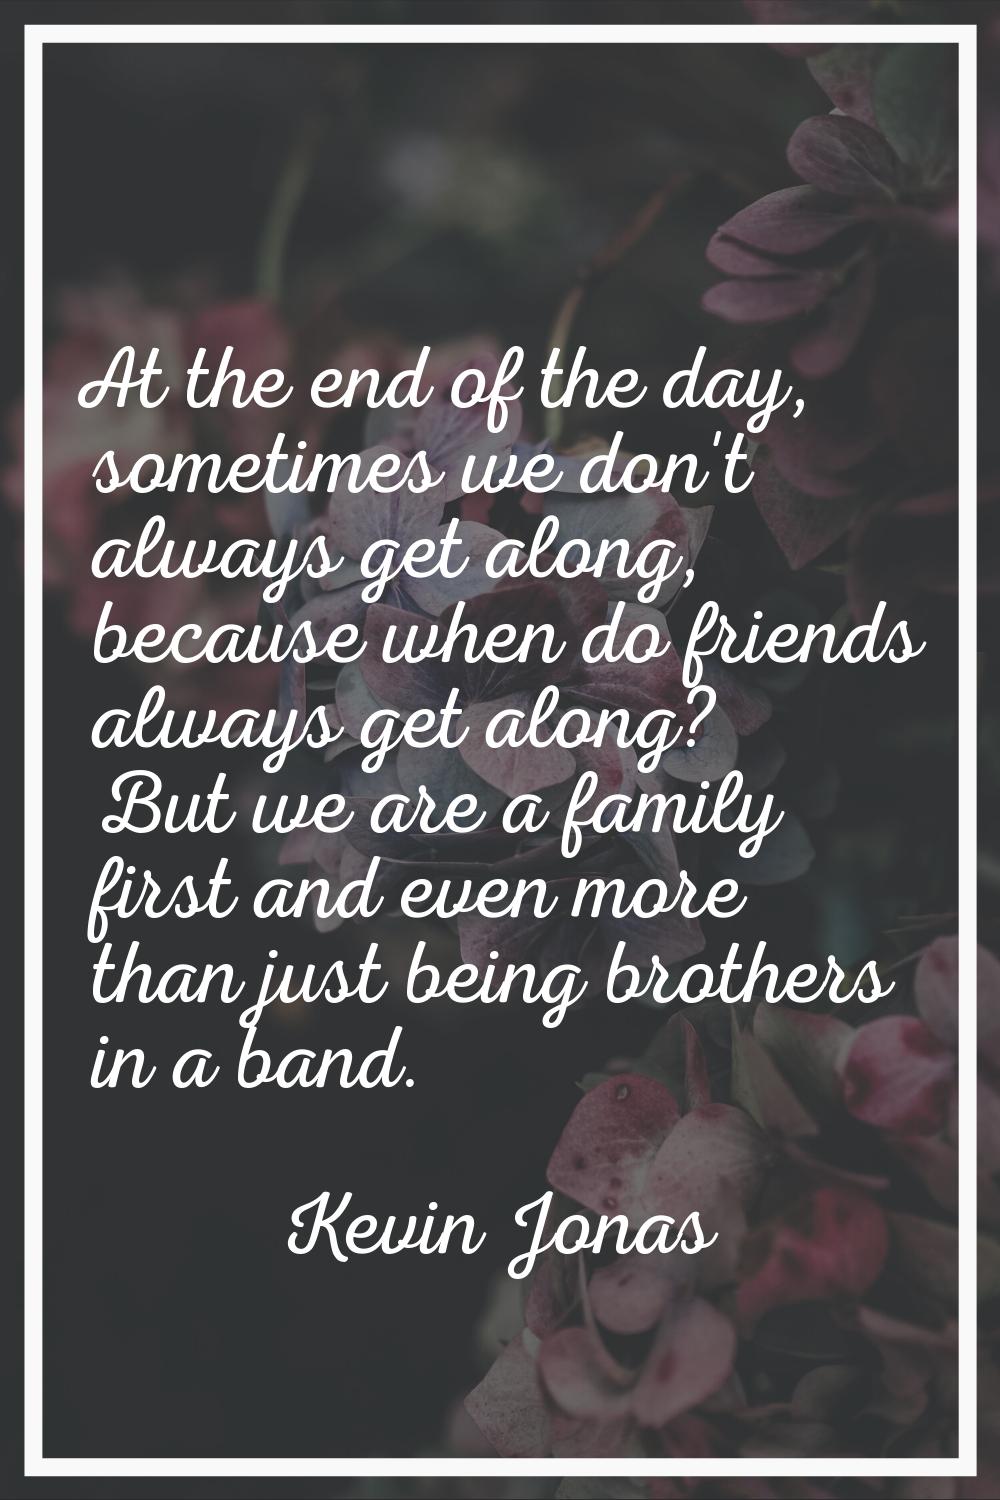 At the end of the day, sometimes we don't always get along, because when do friends always get alon